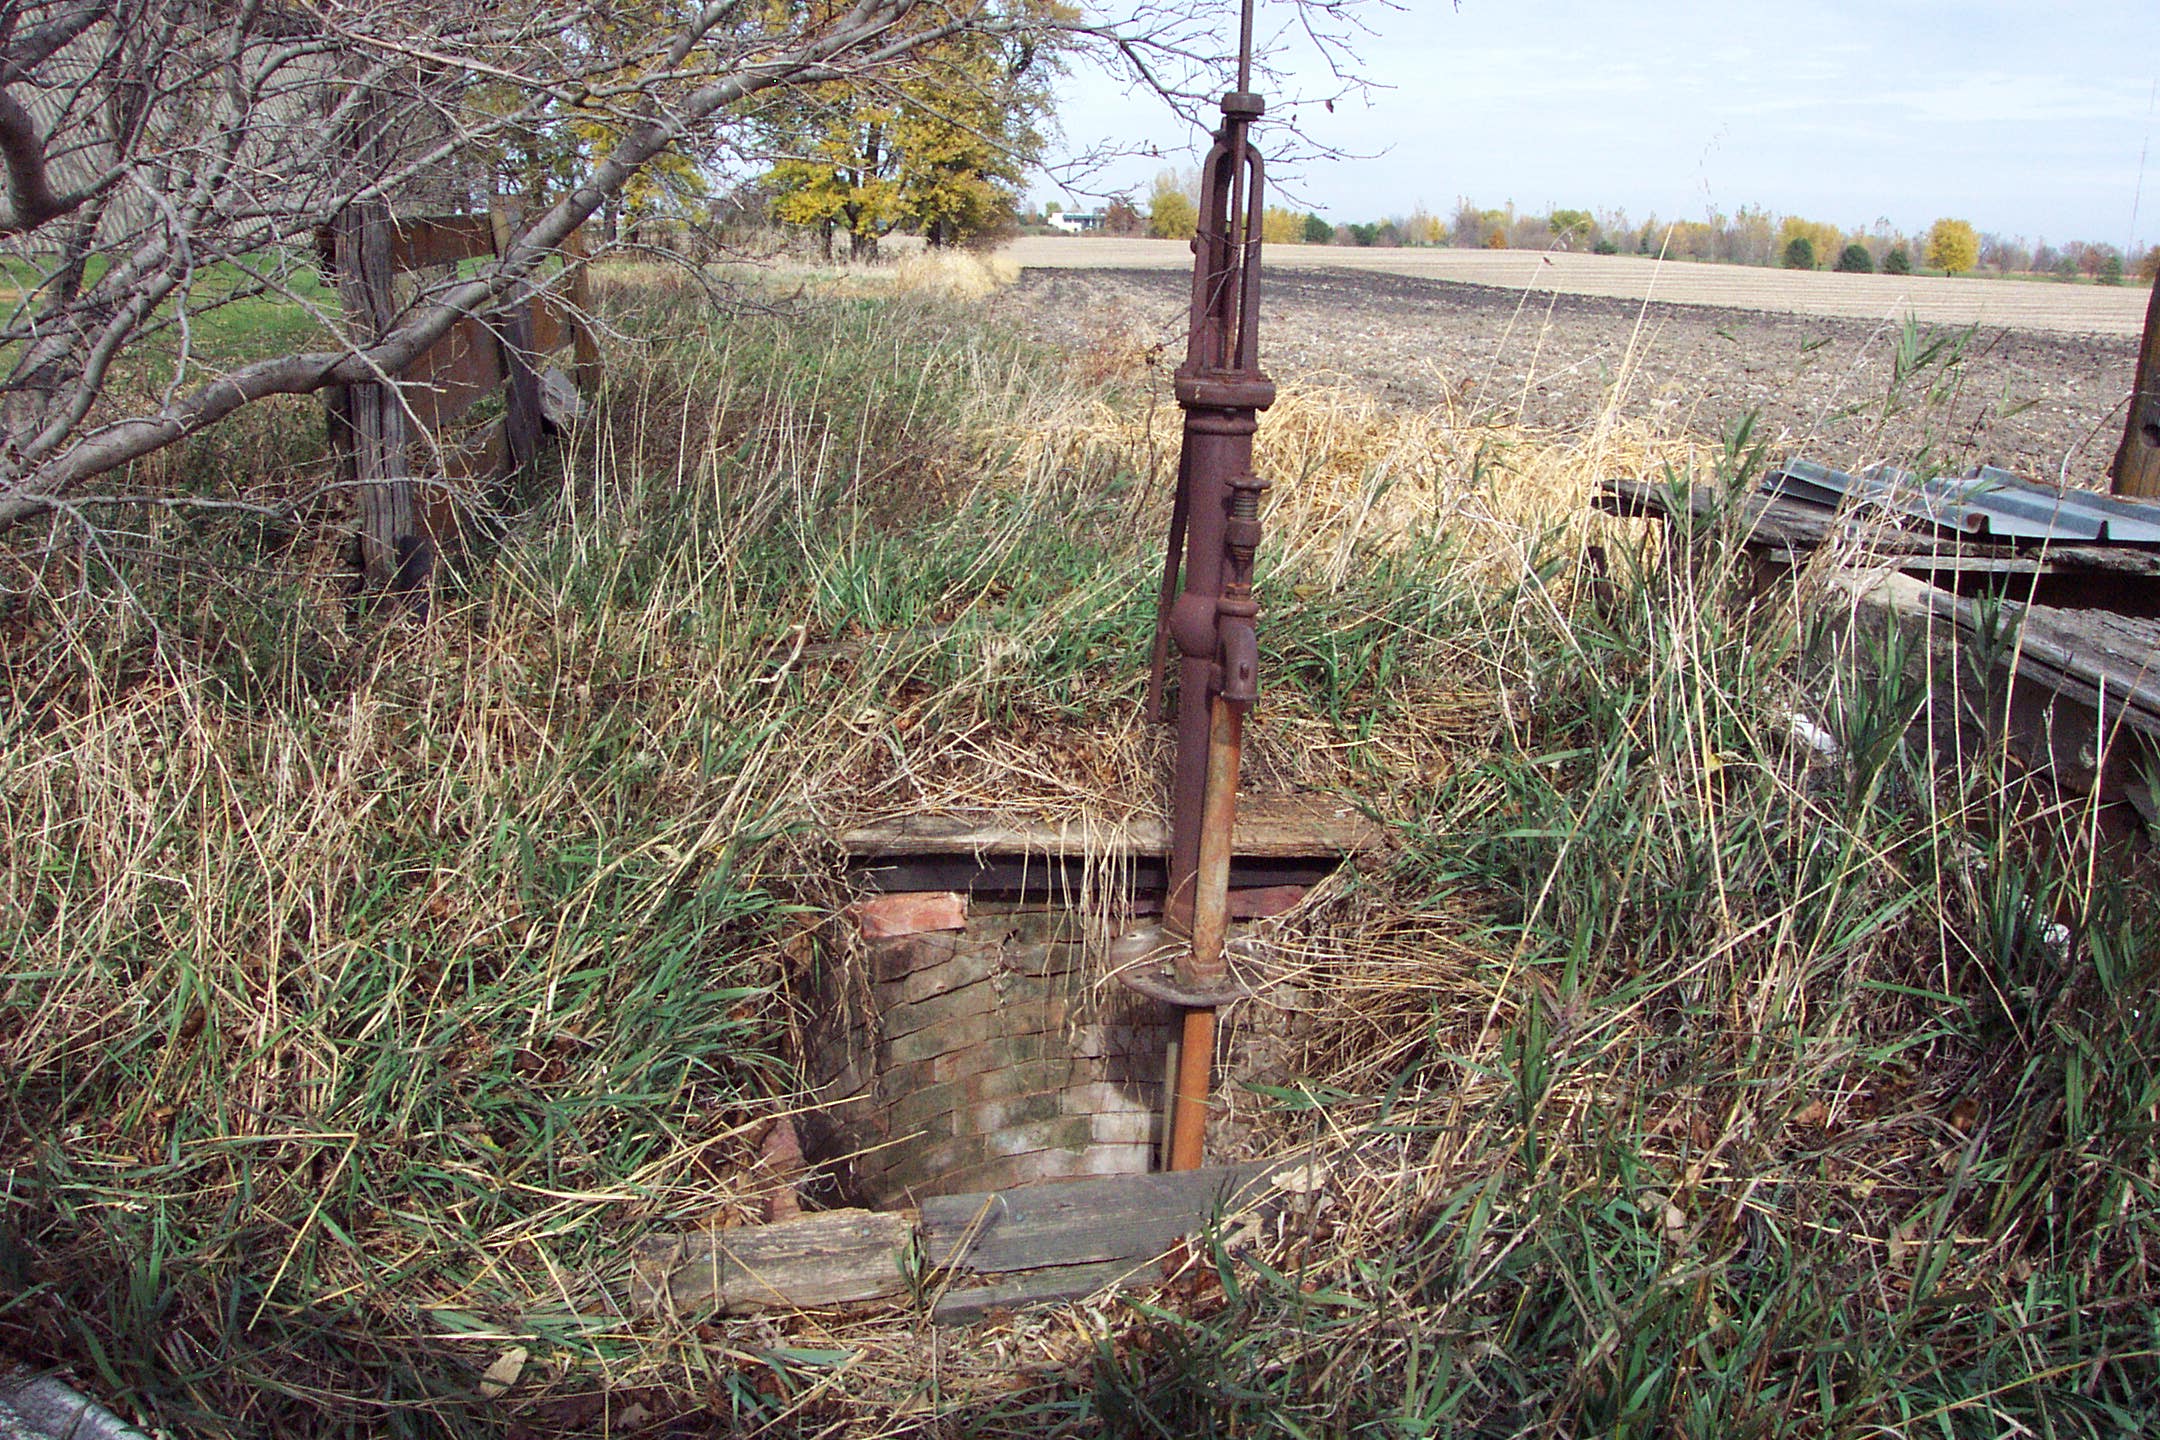 An image of an old abandoned water supply well in desperate need of proper plugging.